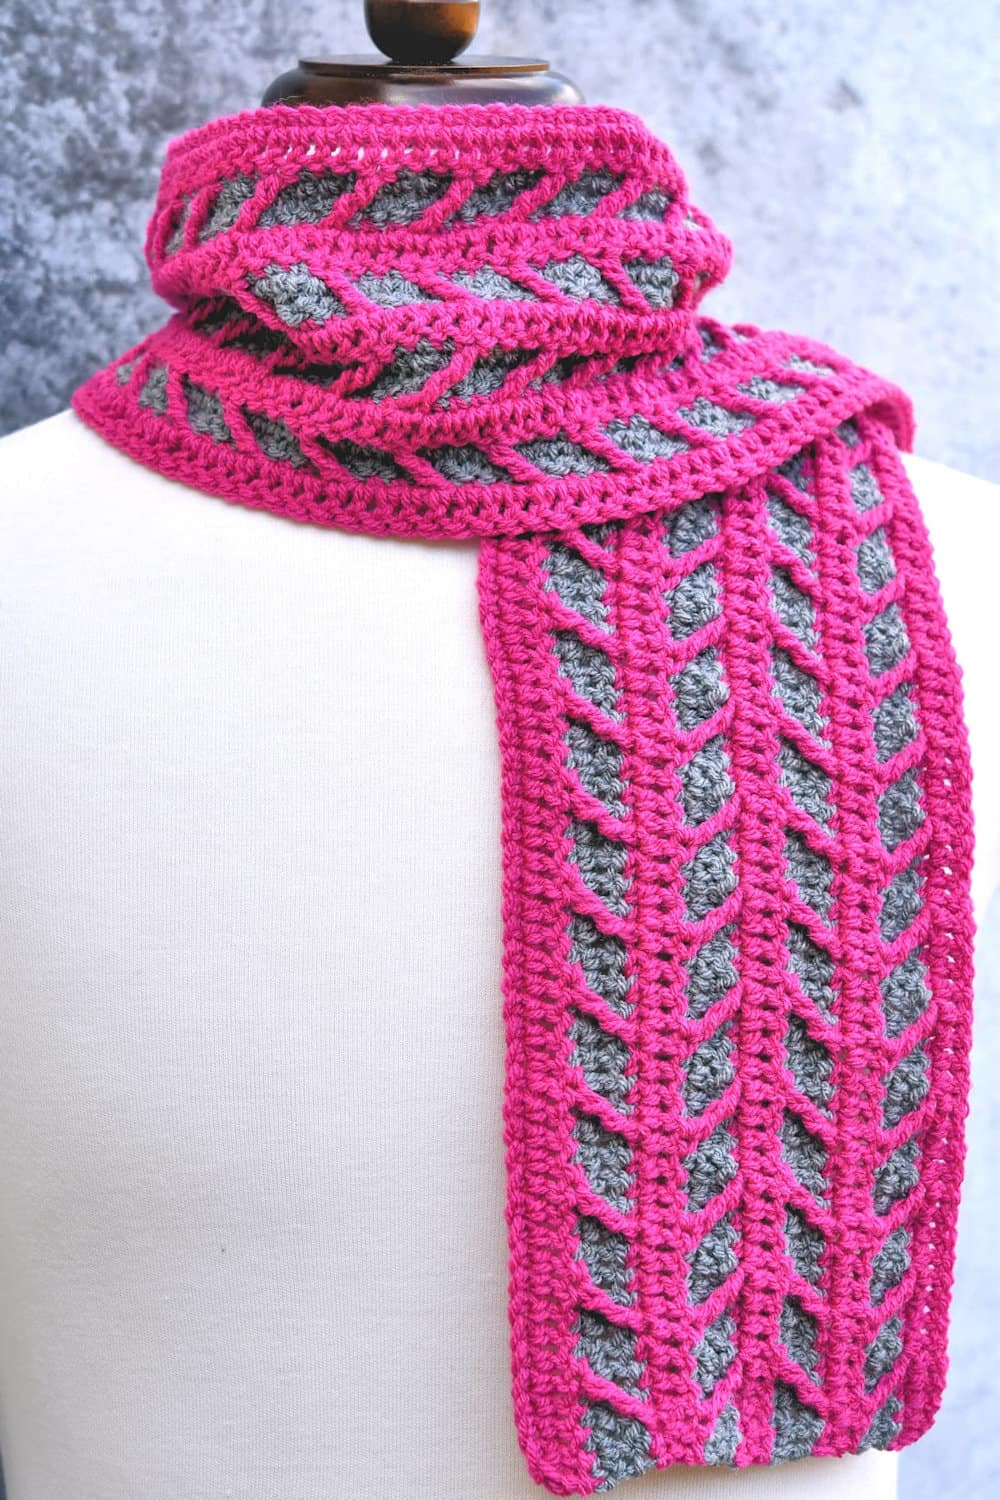 Crocheted pink and grey crocheted scarf.